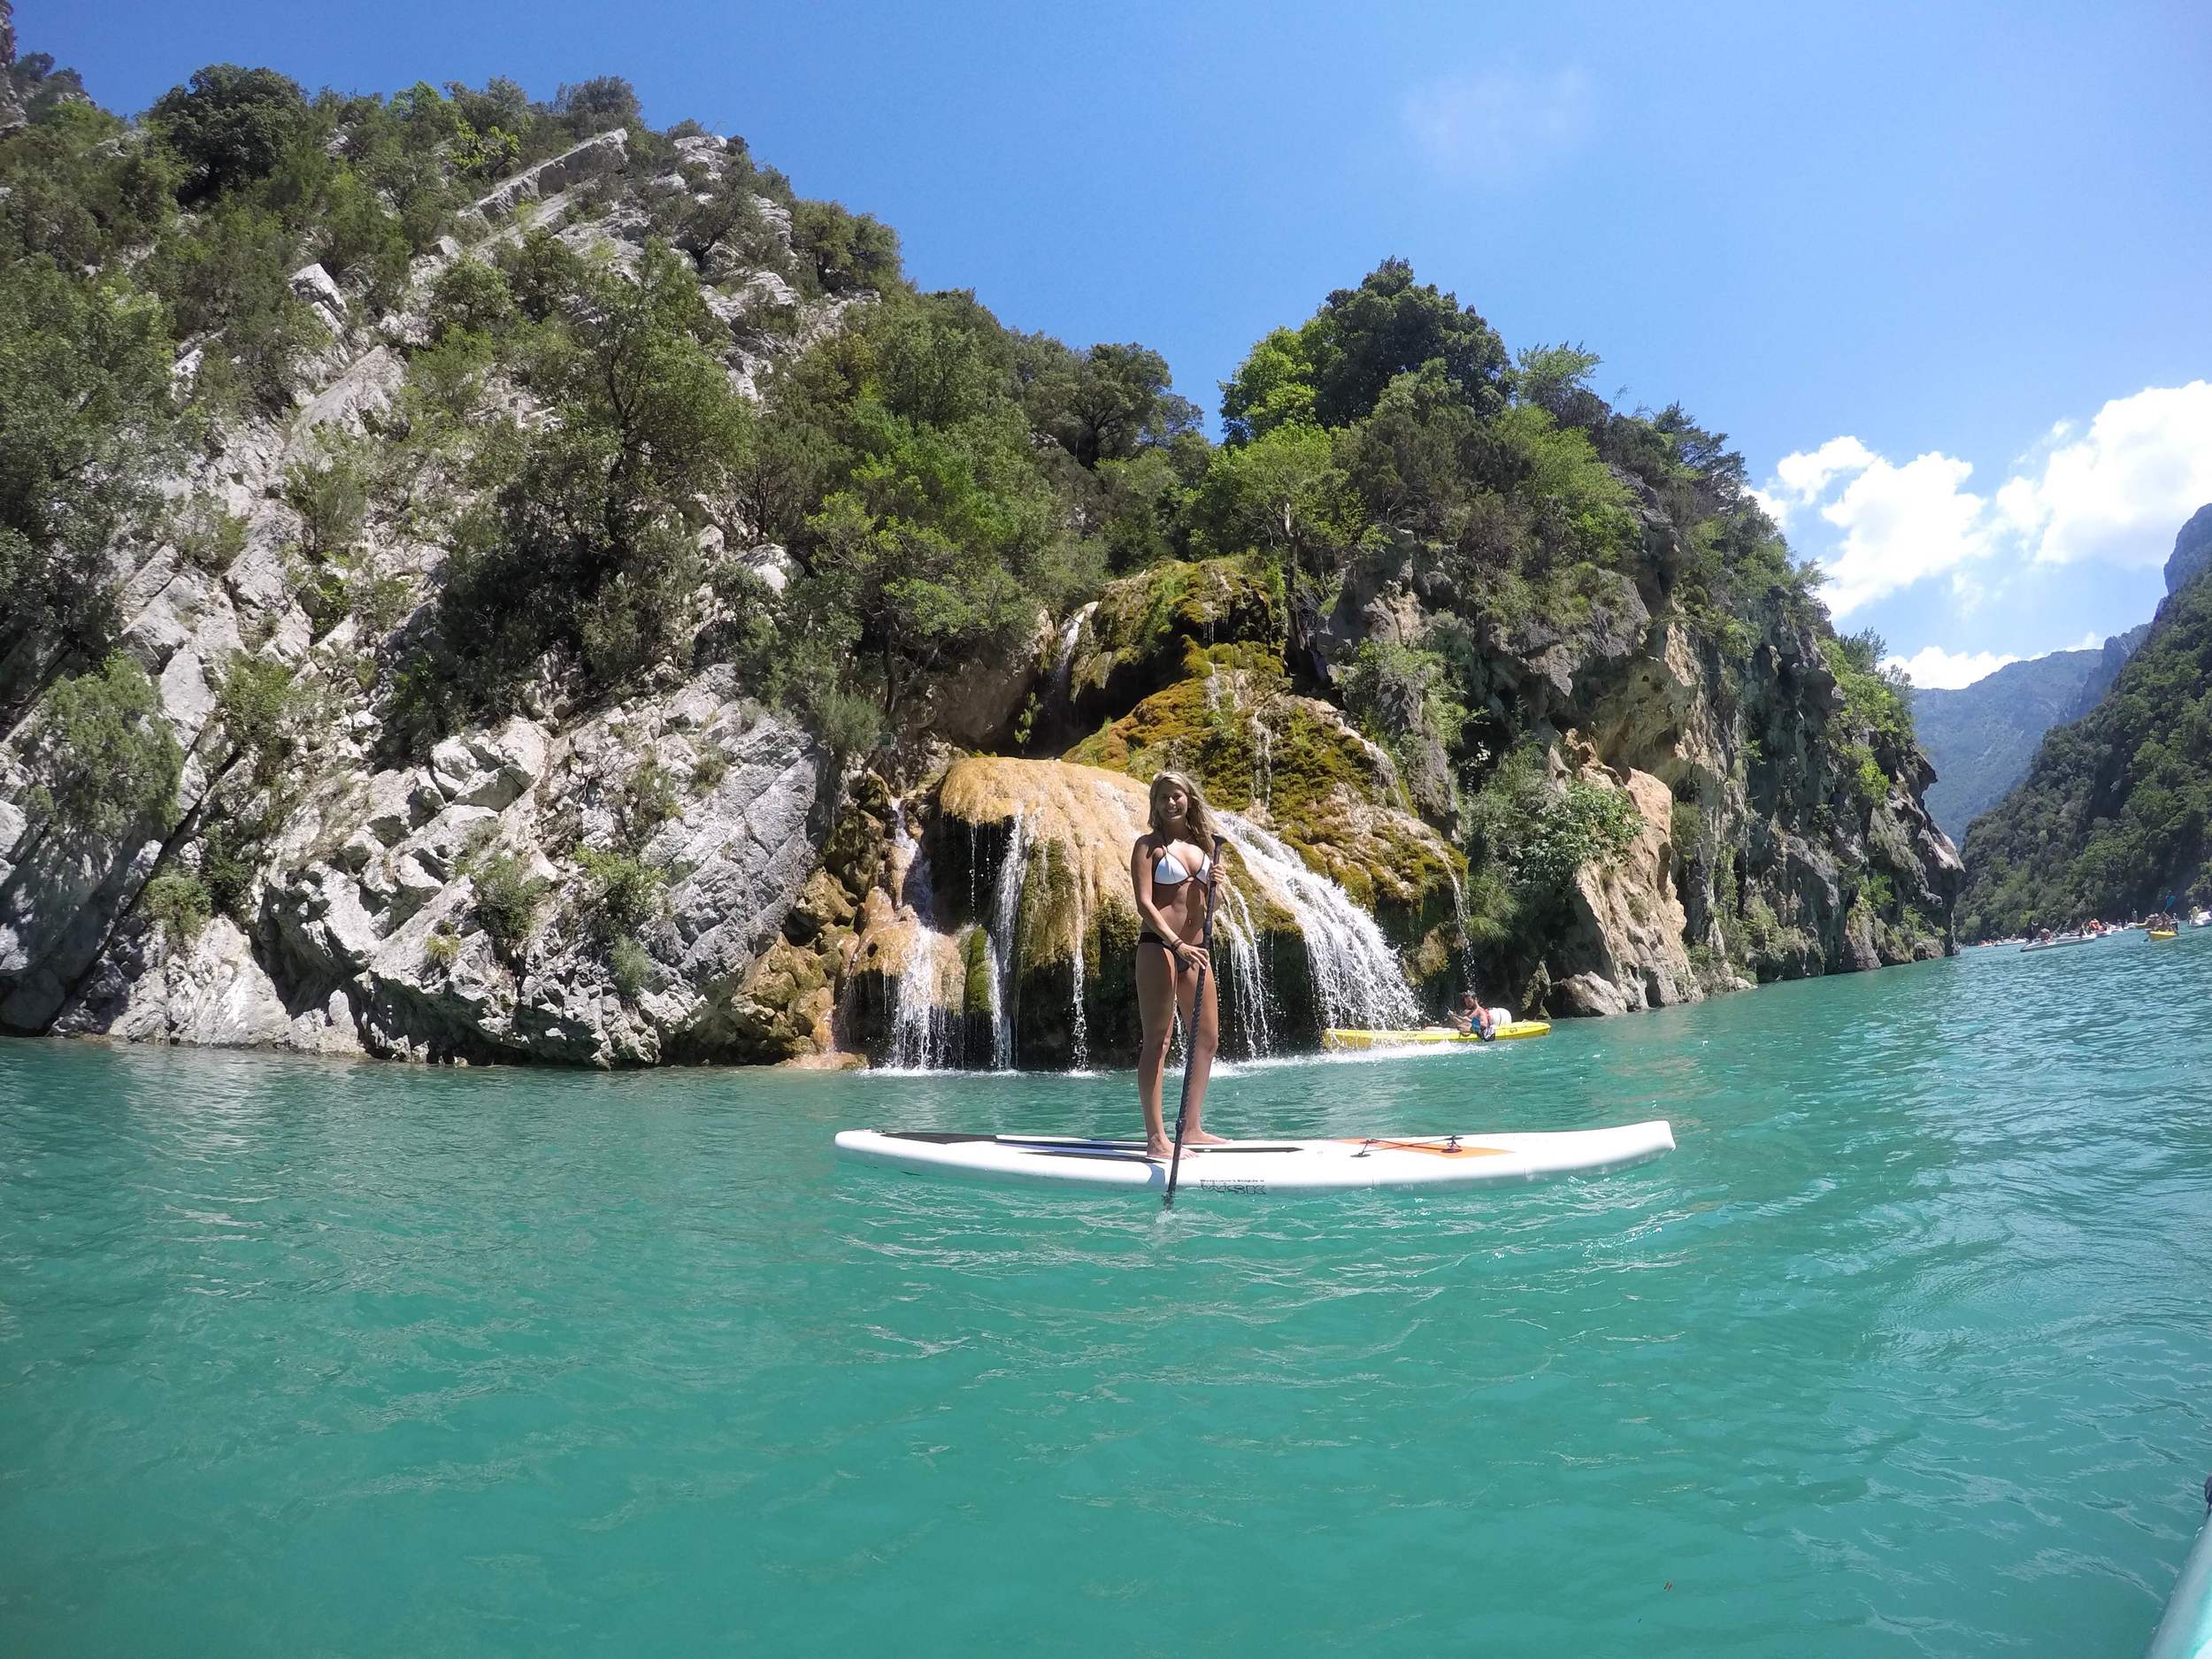 SUP Paddle near the Waterfall - Les Gorges du Verdon - Provence - Côte d'Azur - South of France (French Riviera)